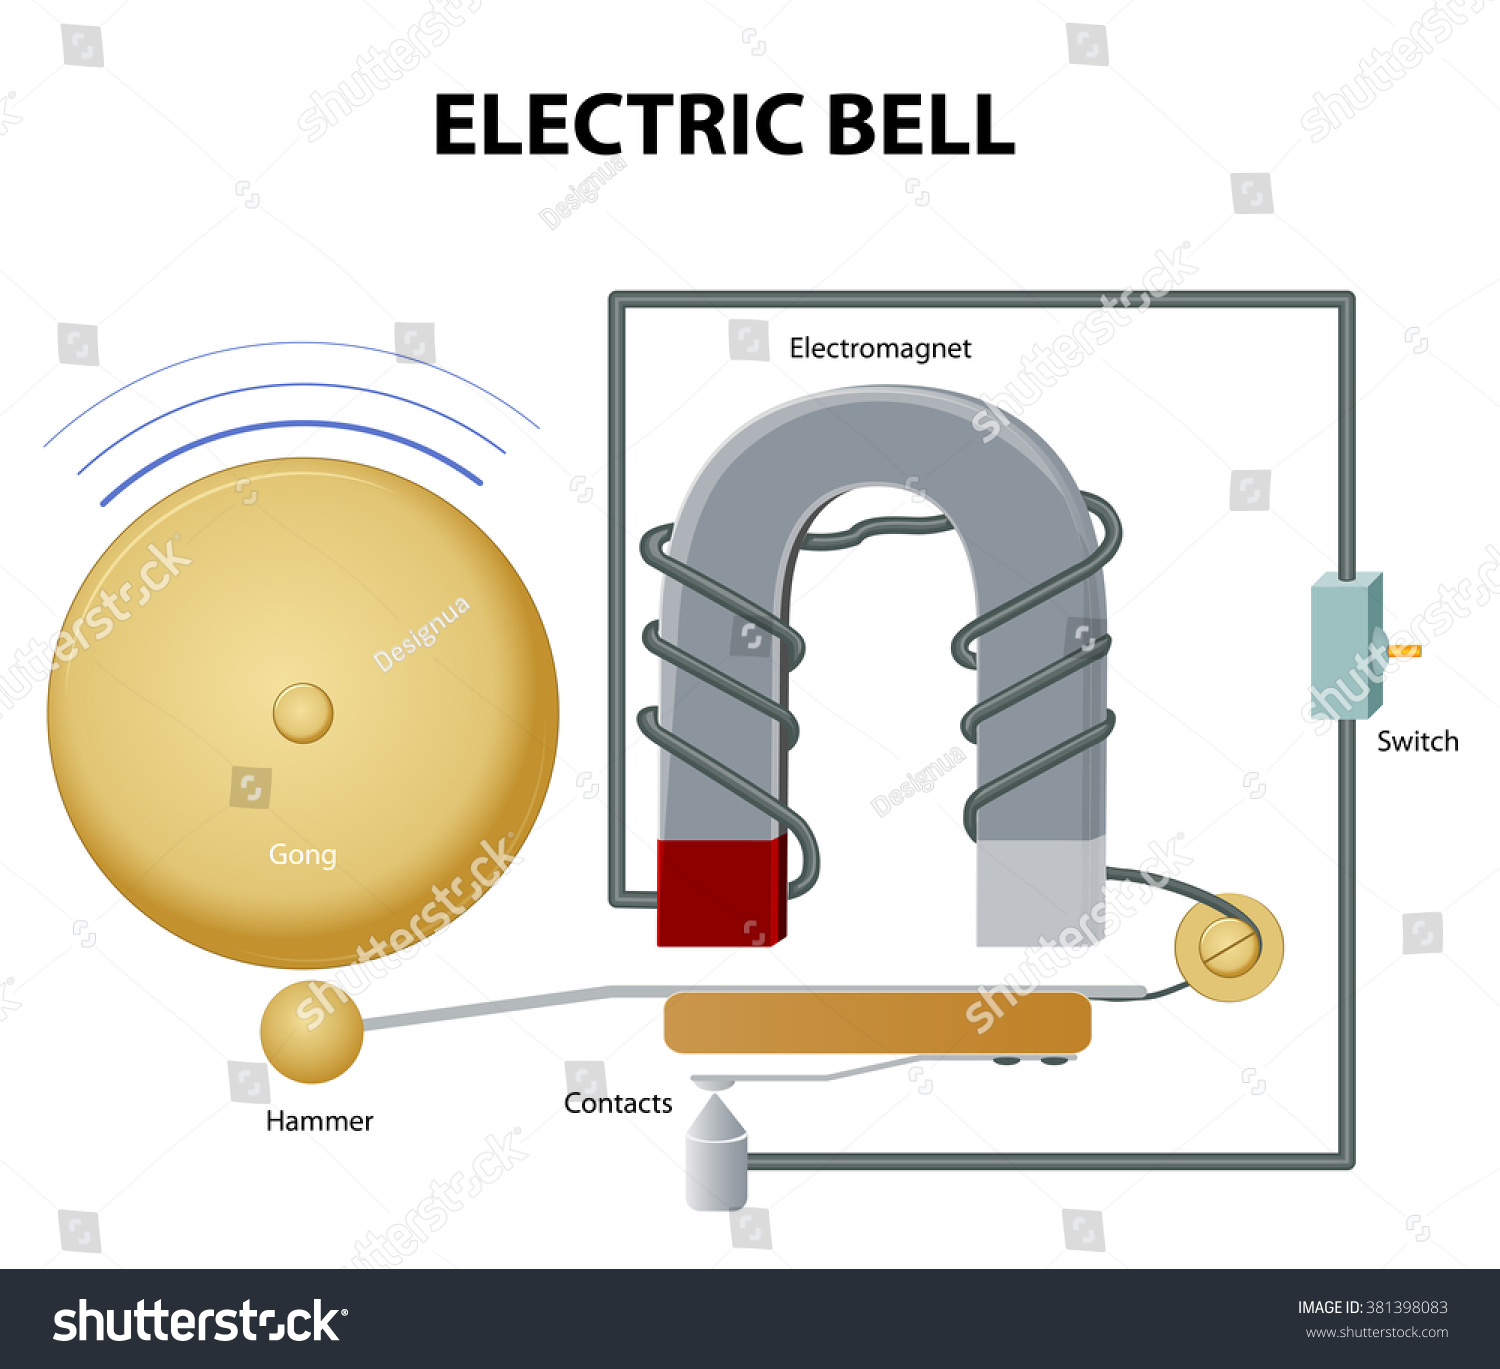 stock vector how electric bell works electromagnet pulls the clapper the hammer strikes the gong in its rest 381398083